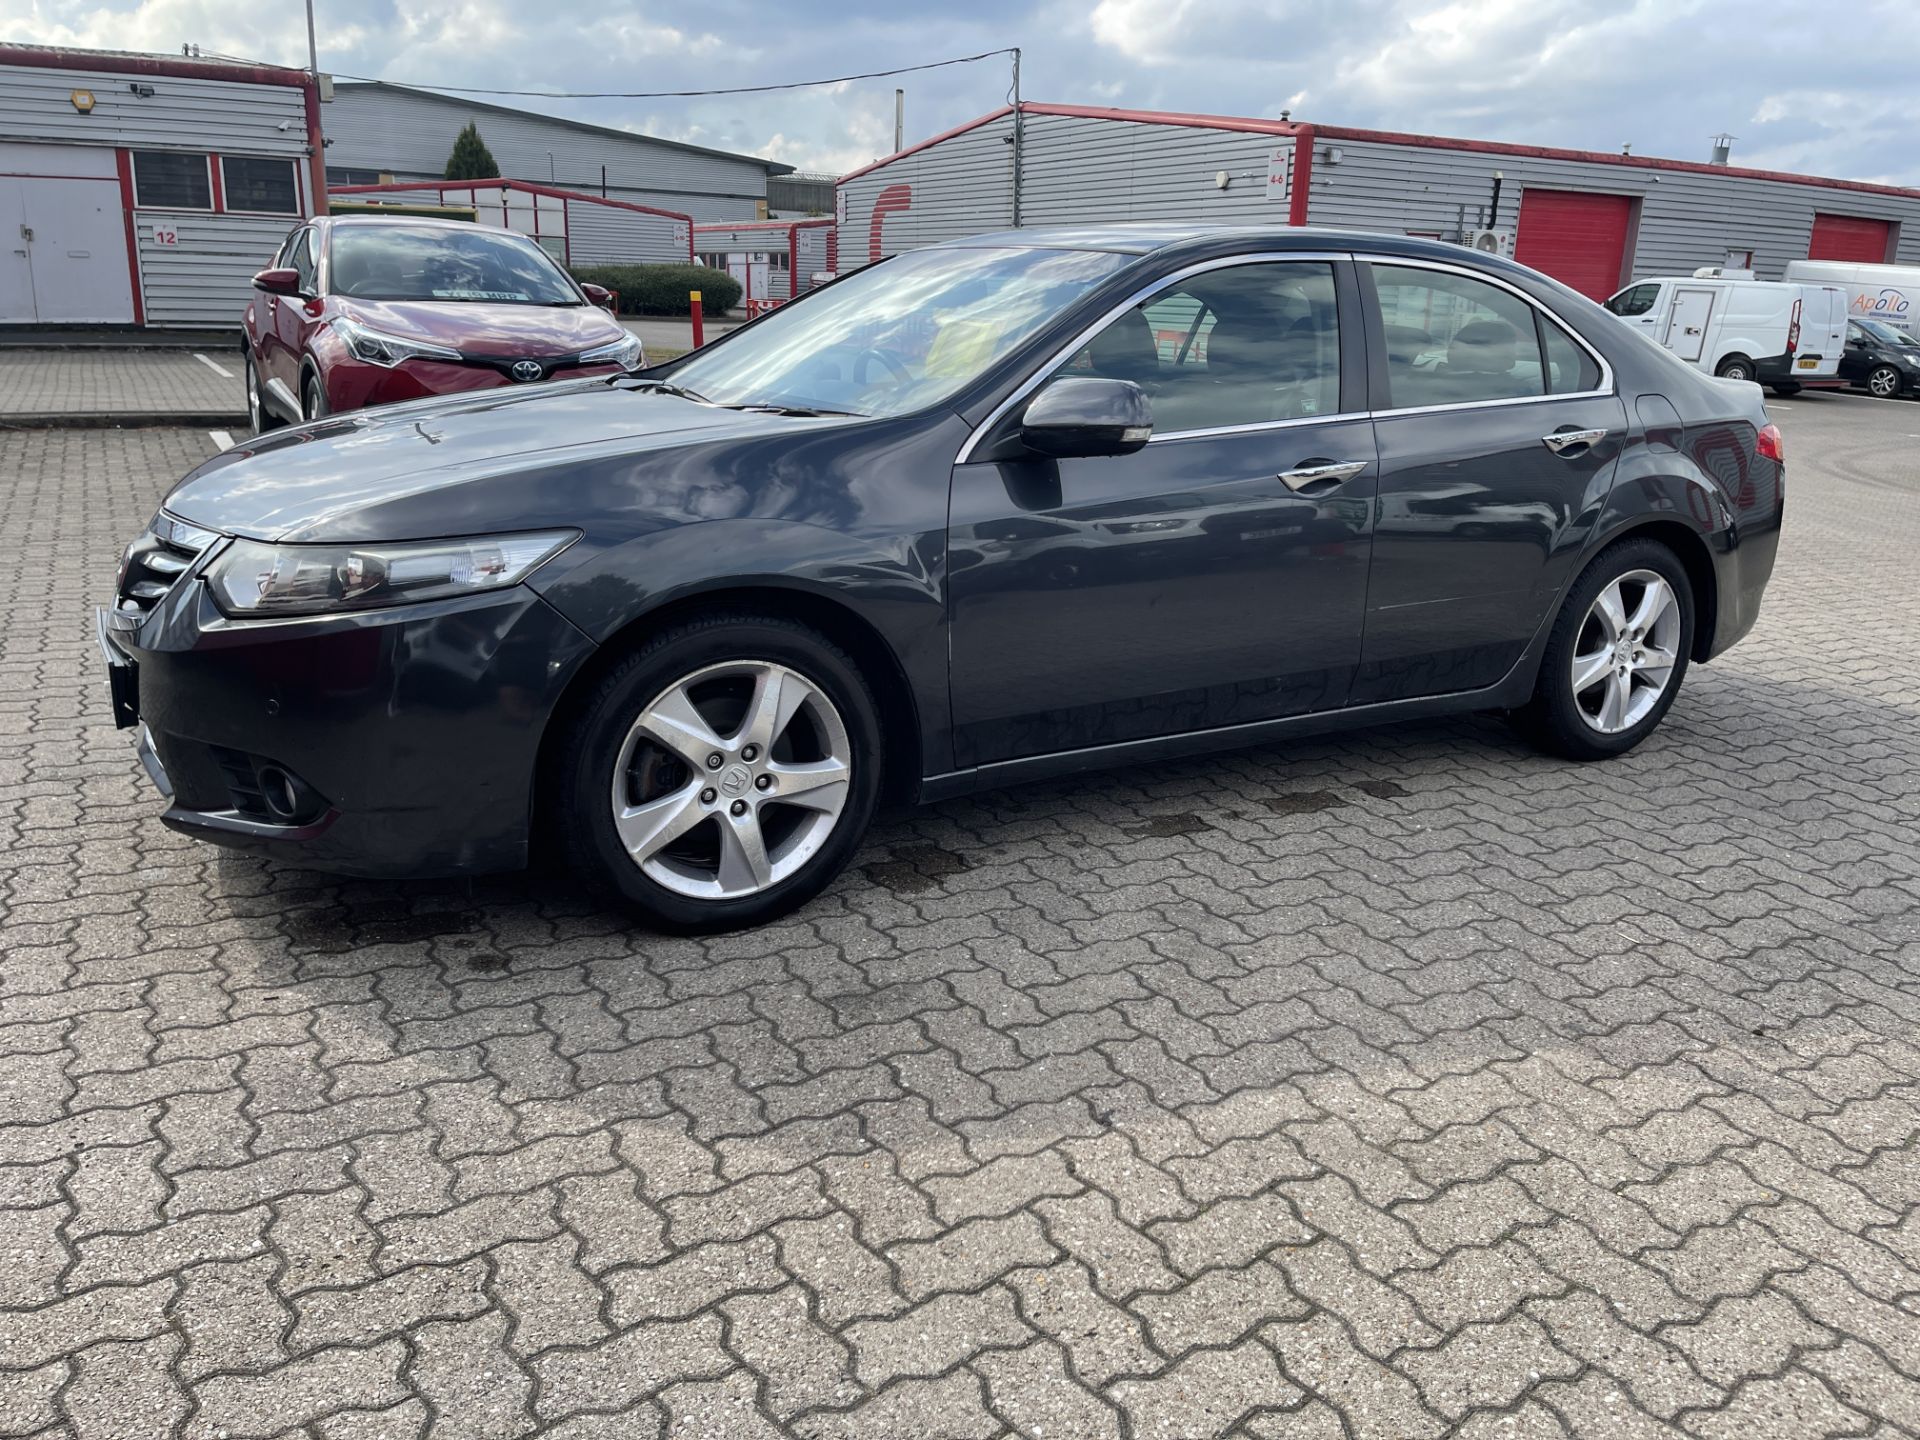 Honda Accord EX-I - VTEC Automatic - LB62 OVX - Clean Air Charge Exempt - Image 4 of 28